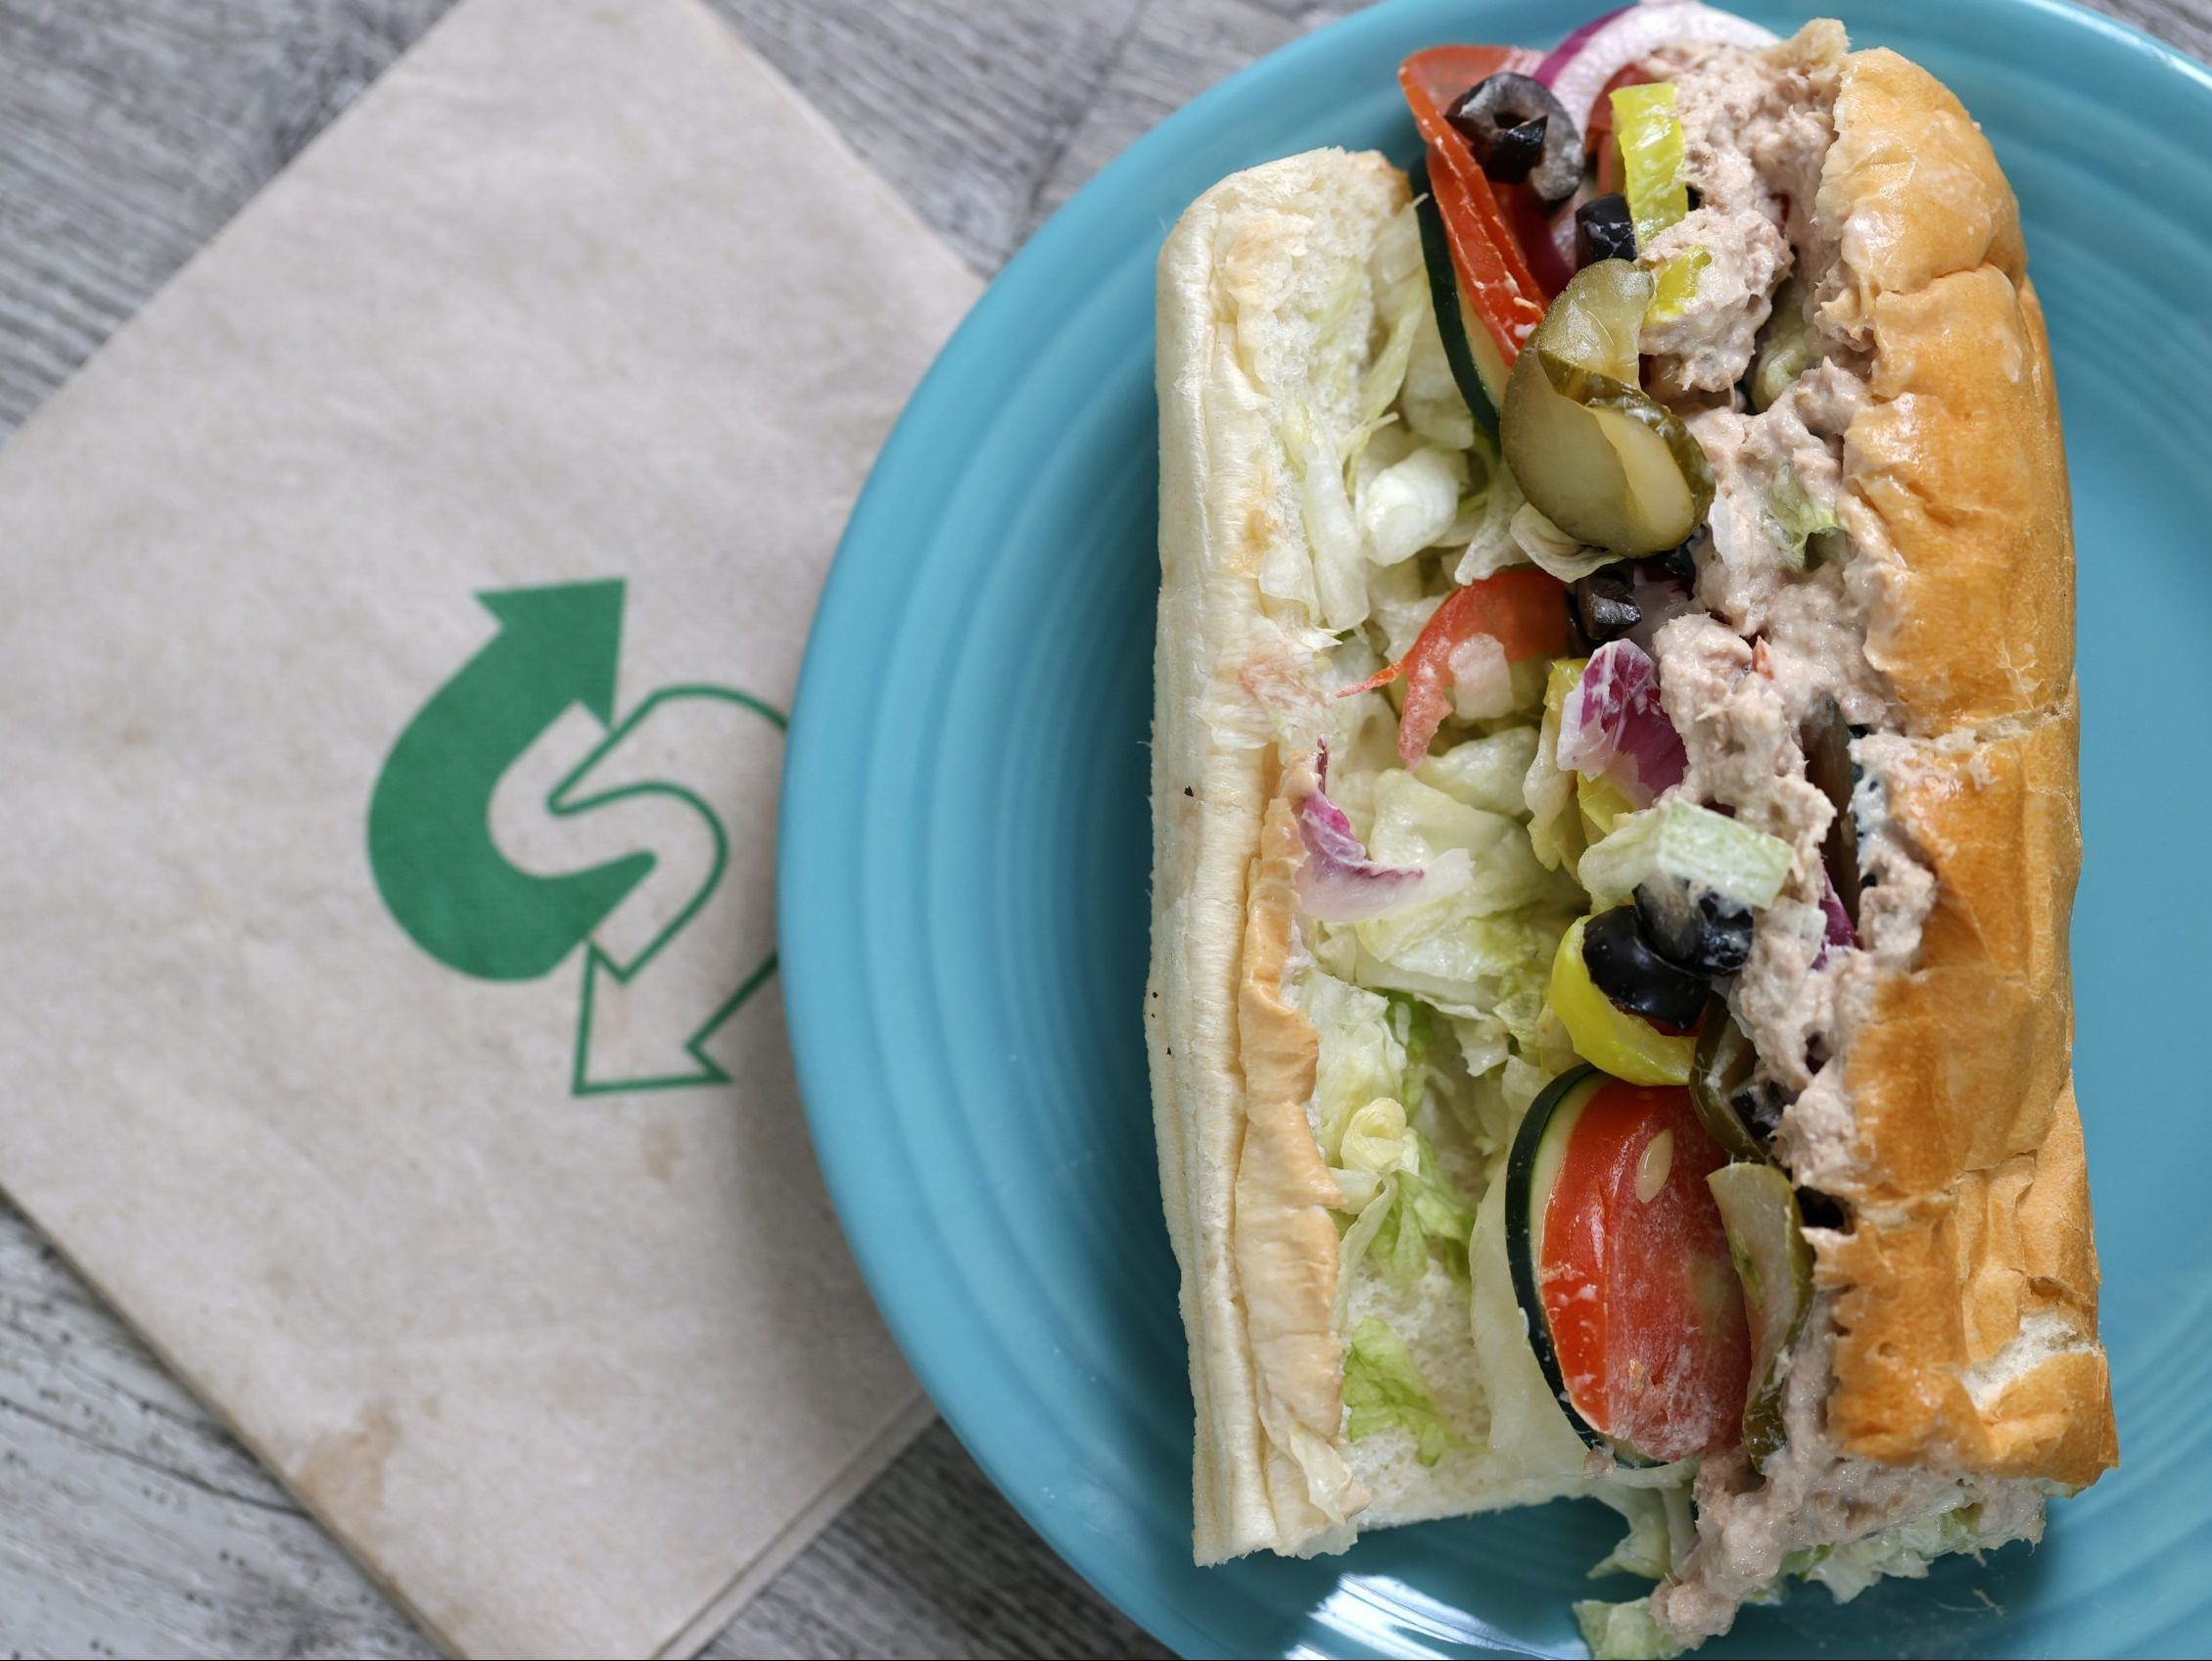 A U.S. judge rules that Subway can be sued over its '100% tuna